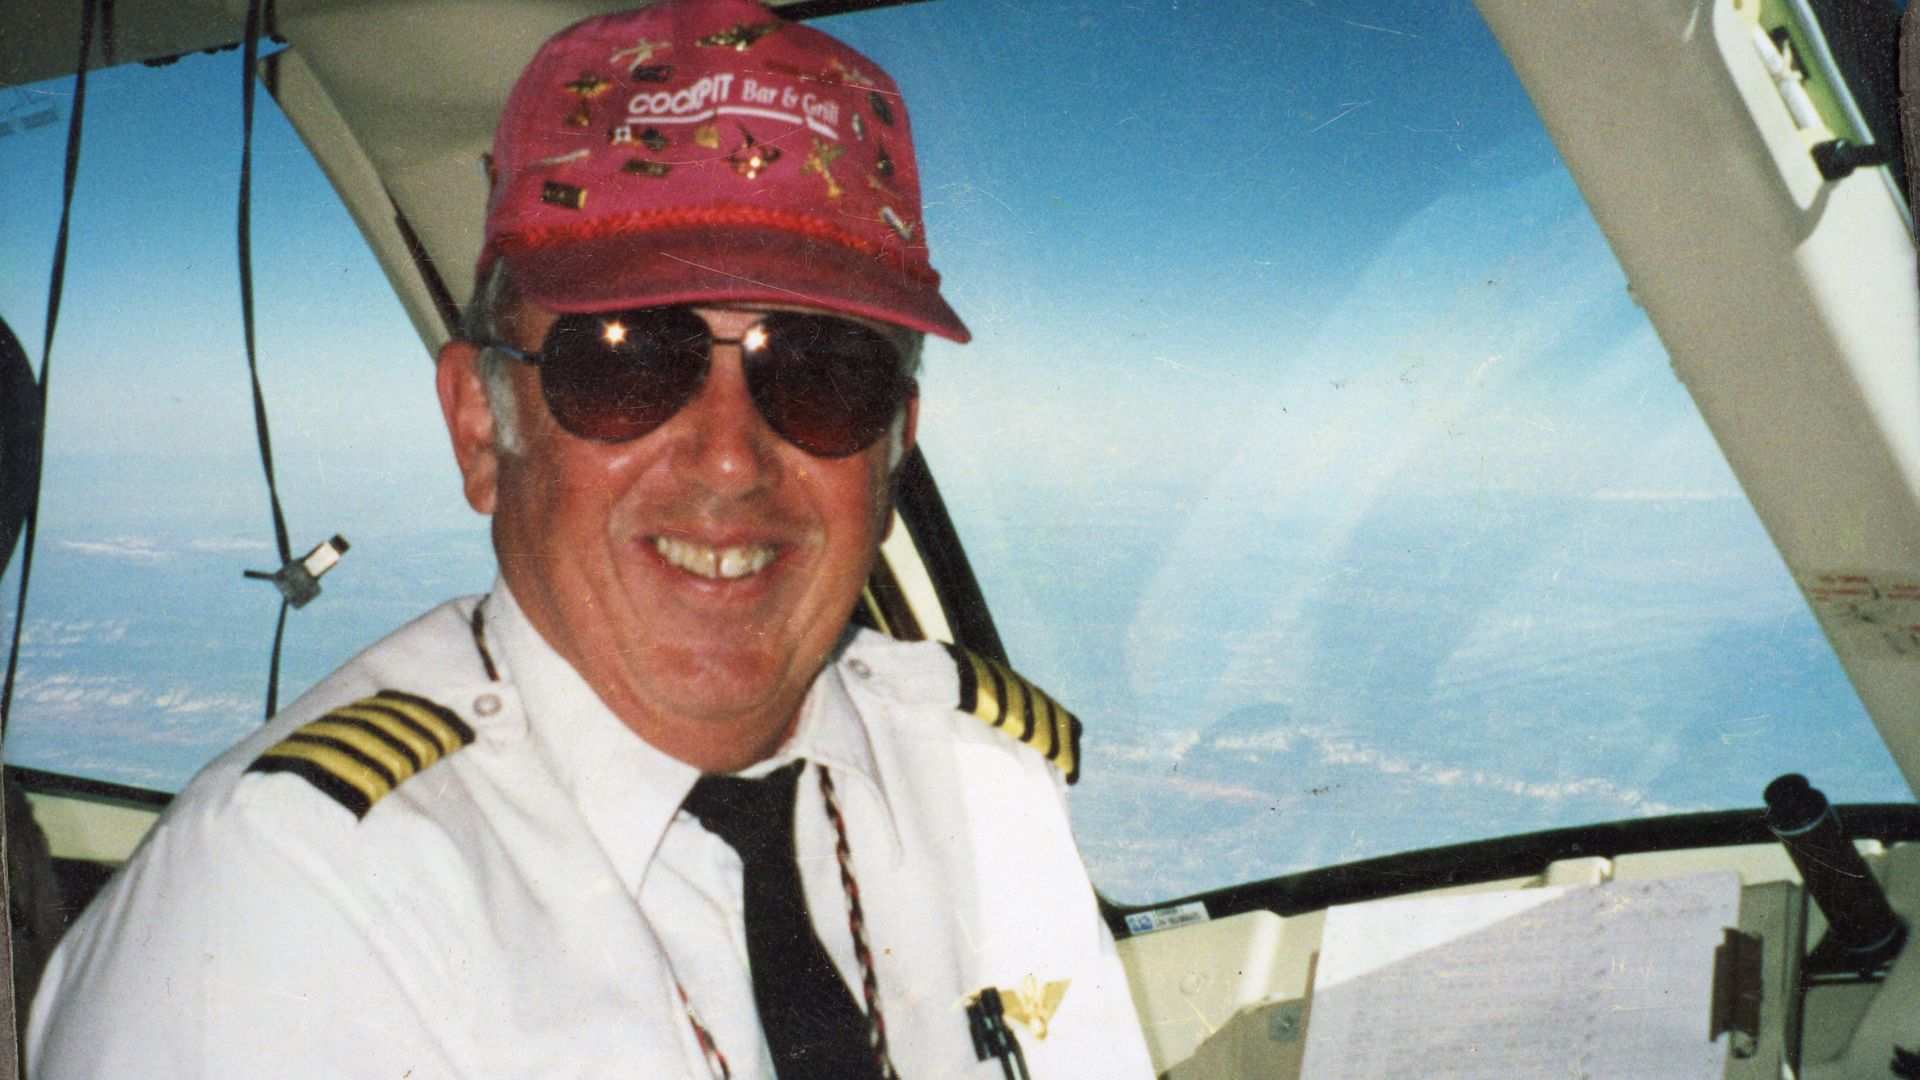 A smiling man in a cockpit, wearing a pilot's uniform and a white baseball cap